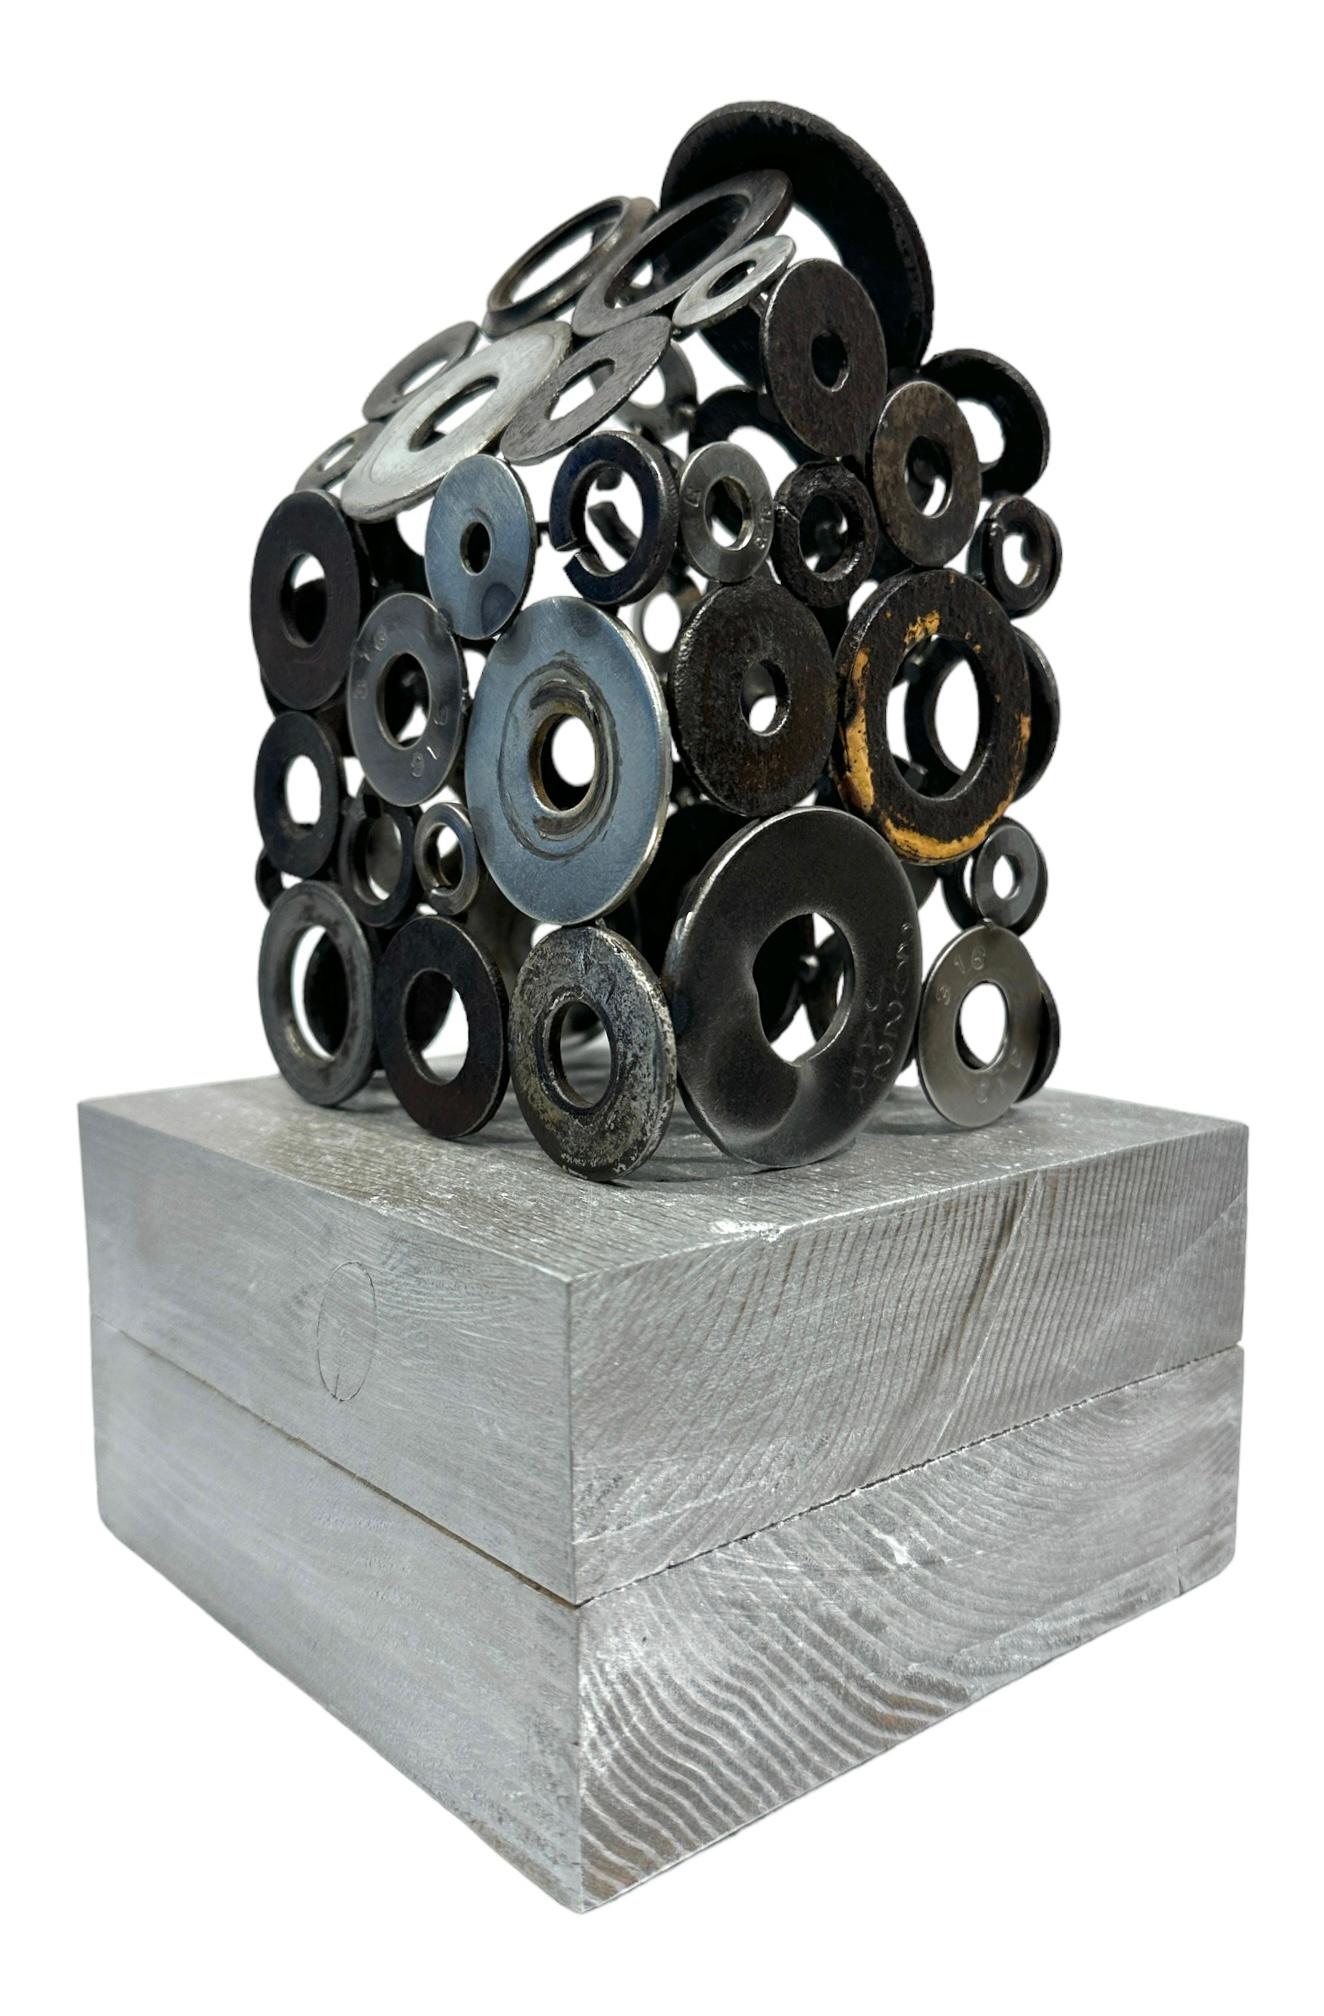 Jim Rose - Construct No. 02, Salvaged Steel and Aluminum Industrial Objects For Sale 2